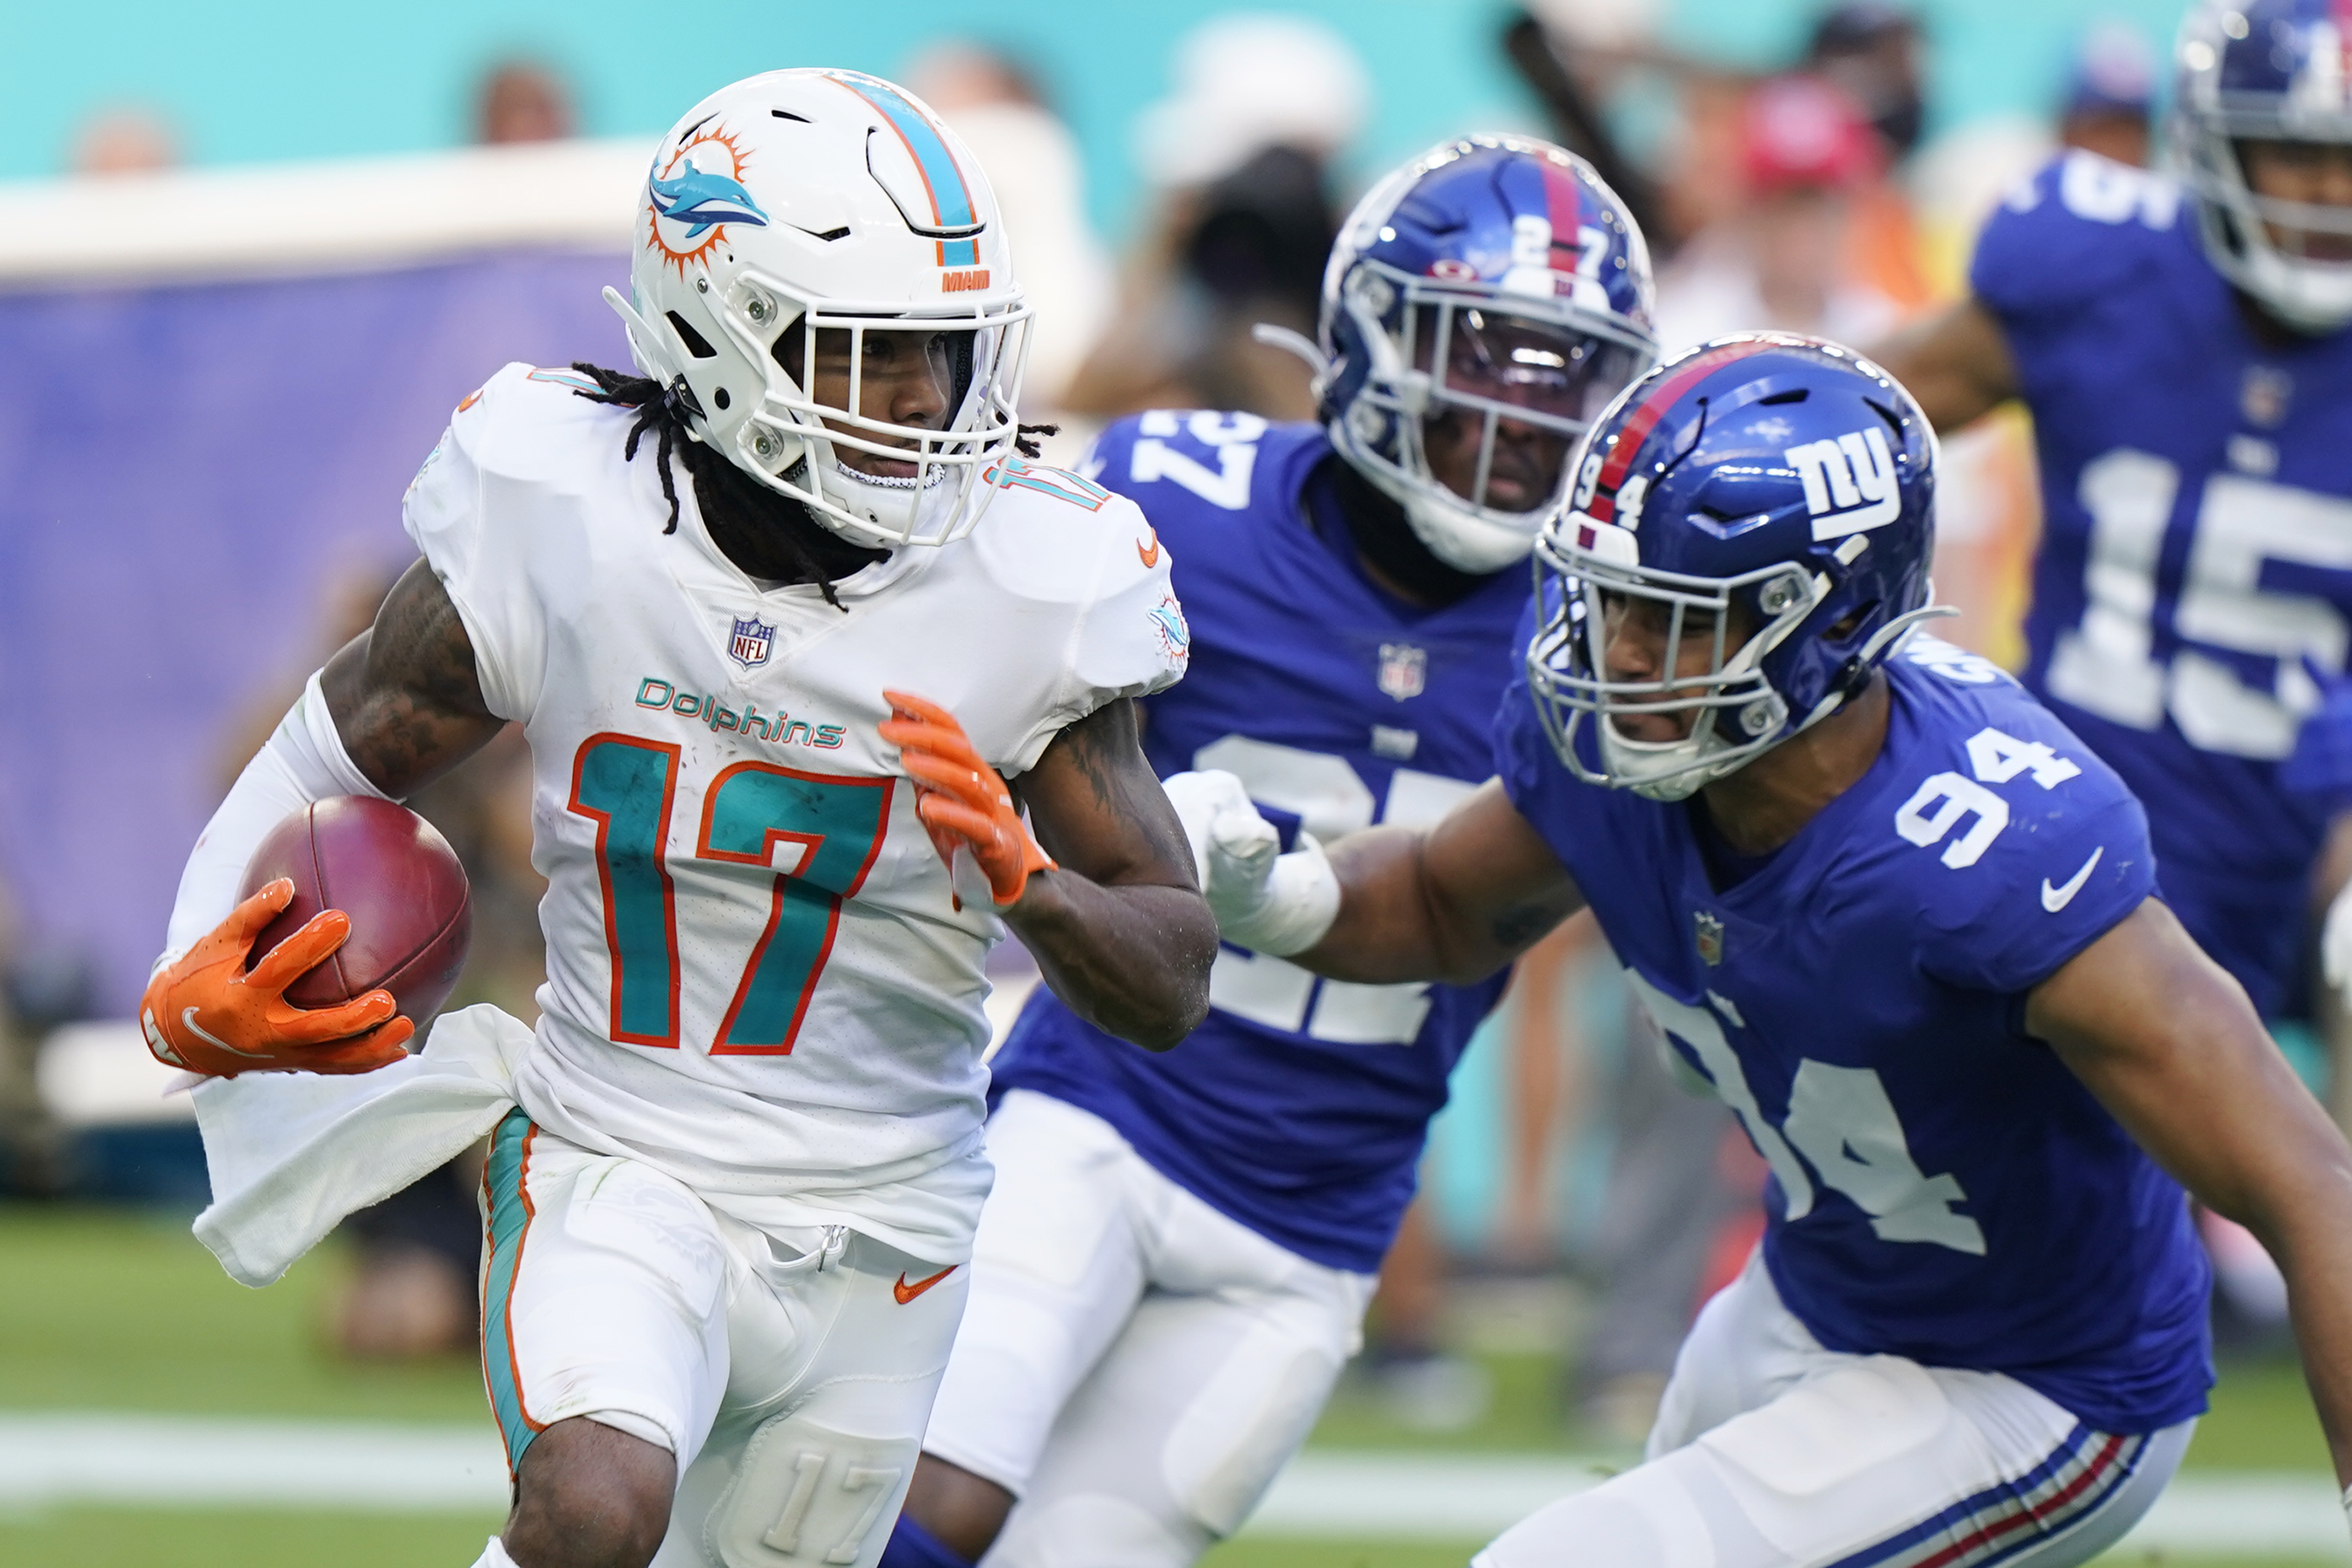 Miami Dolphins extend win streak with win over Jets